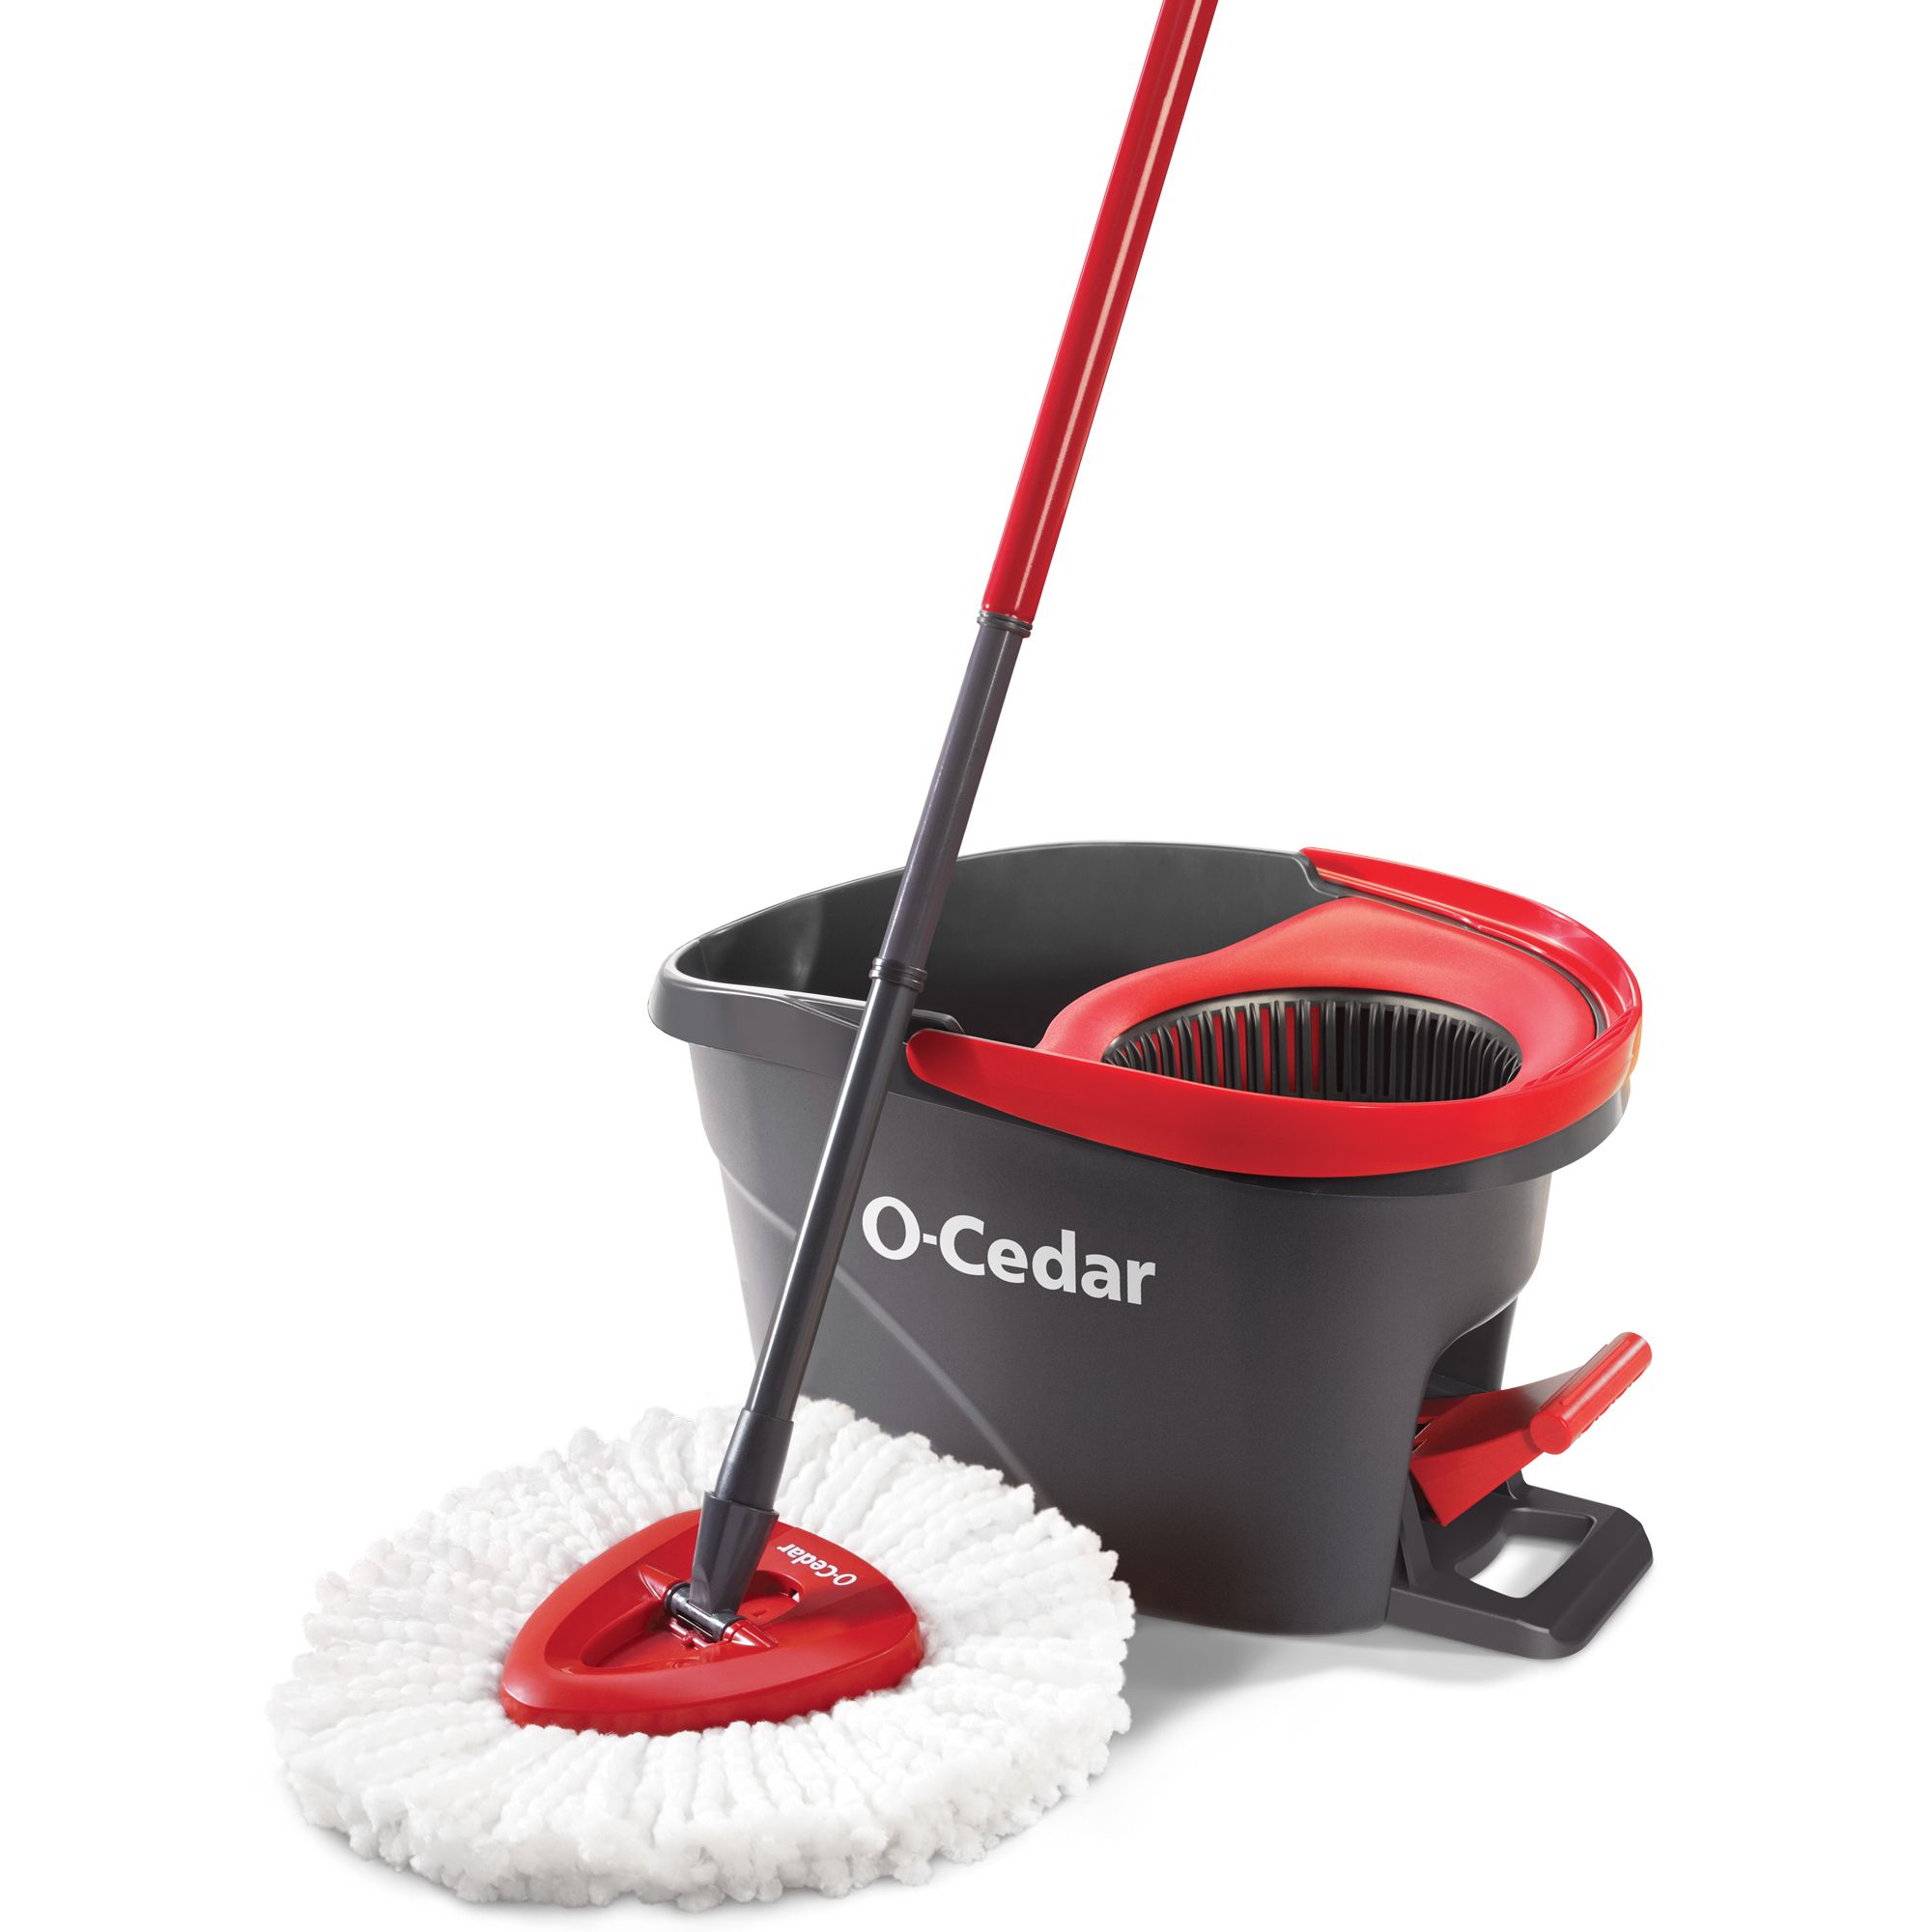 2019 New Best Cleaning Gadget Recommended Best Seller Of The Year 